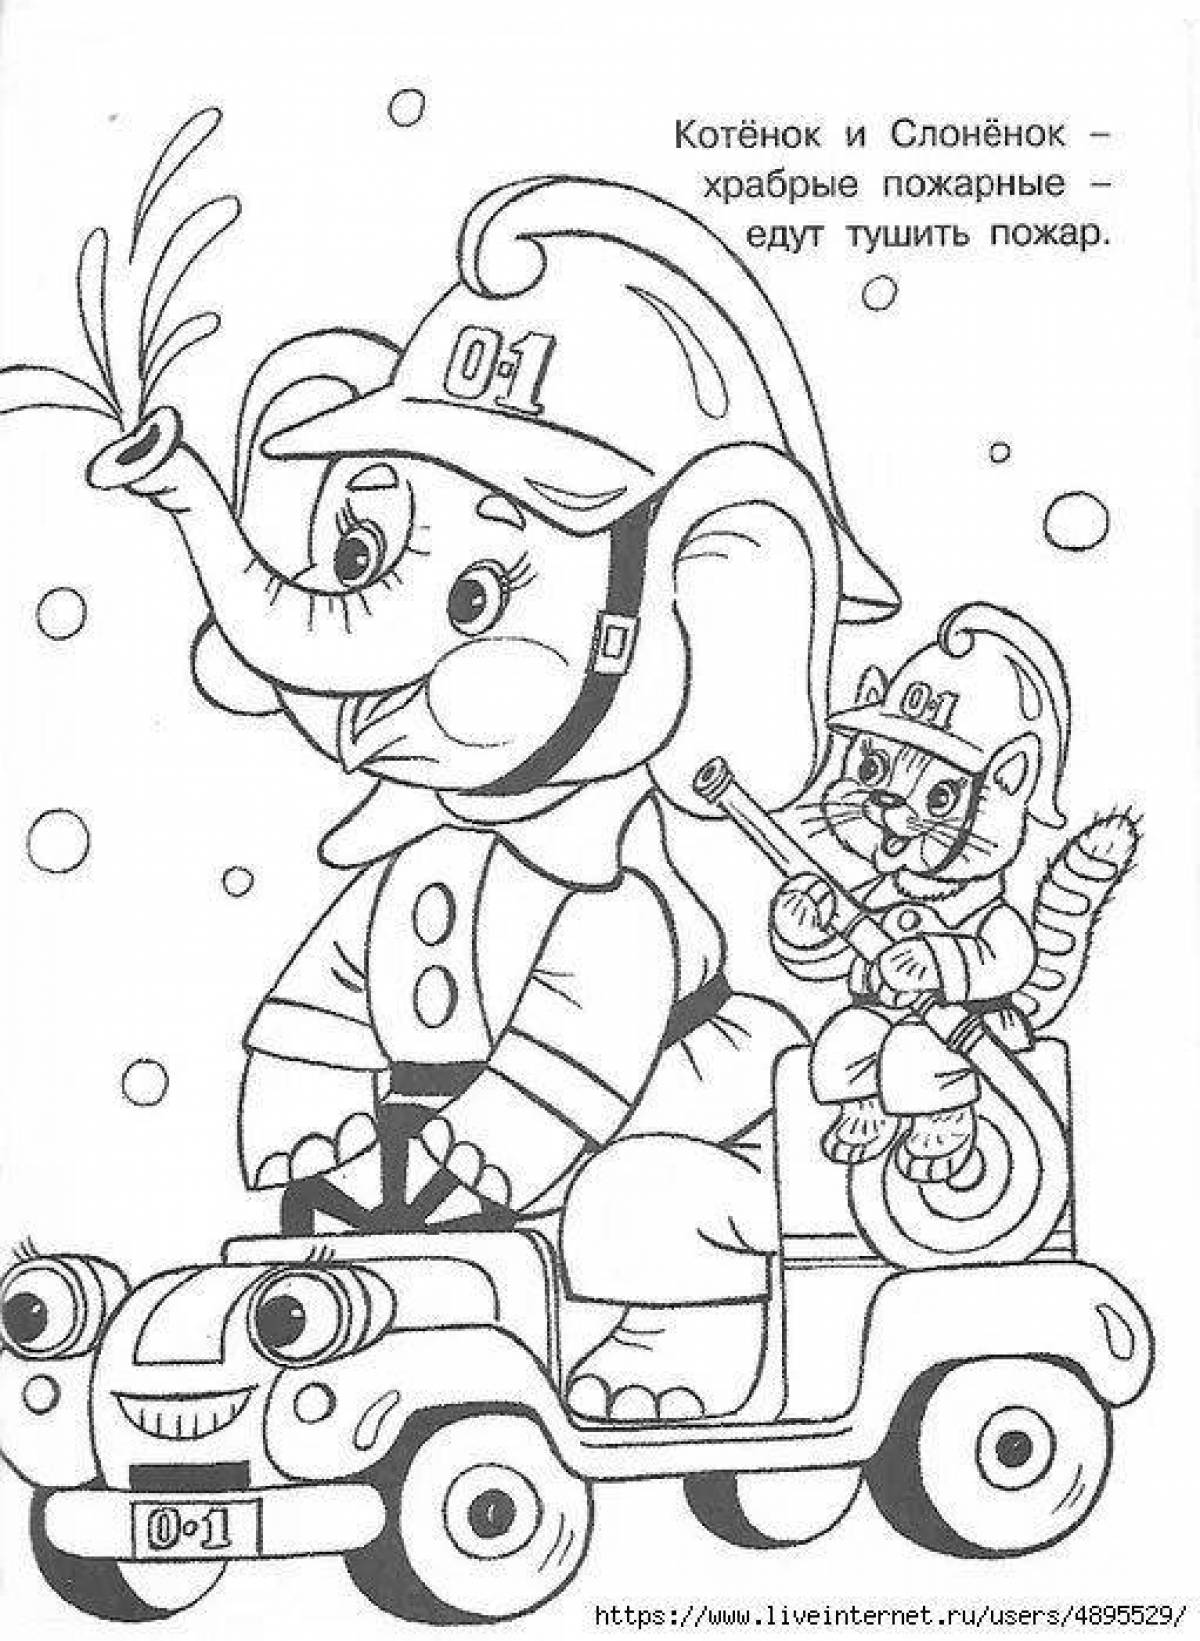 Creative fire safety coloring book for 6-7 year olds